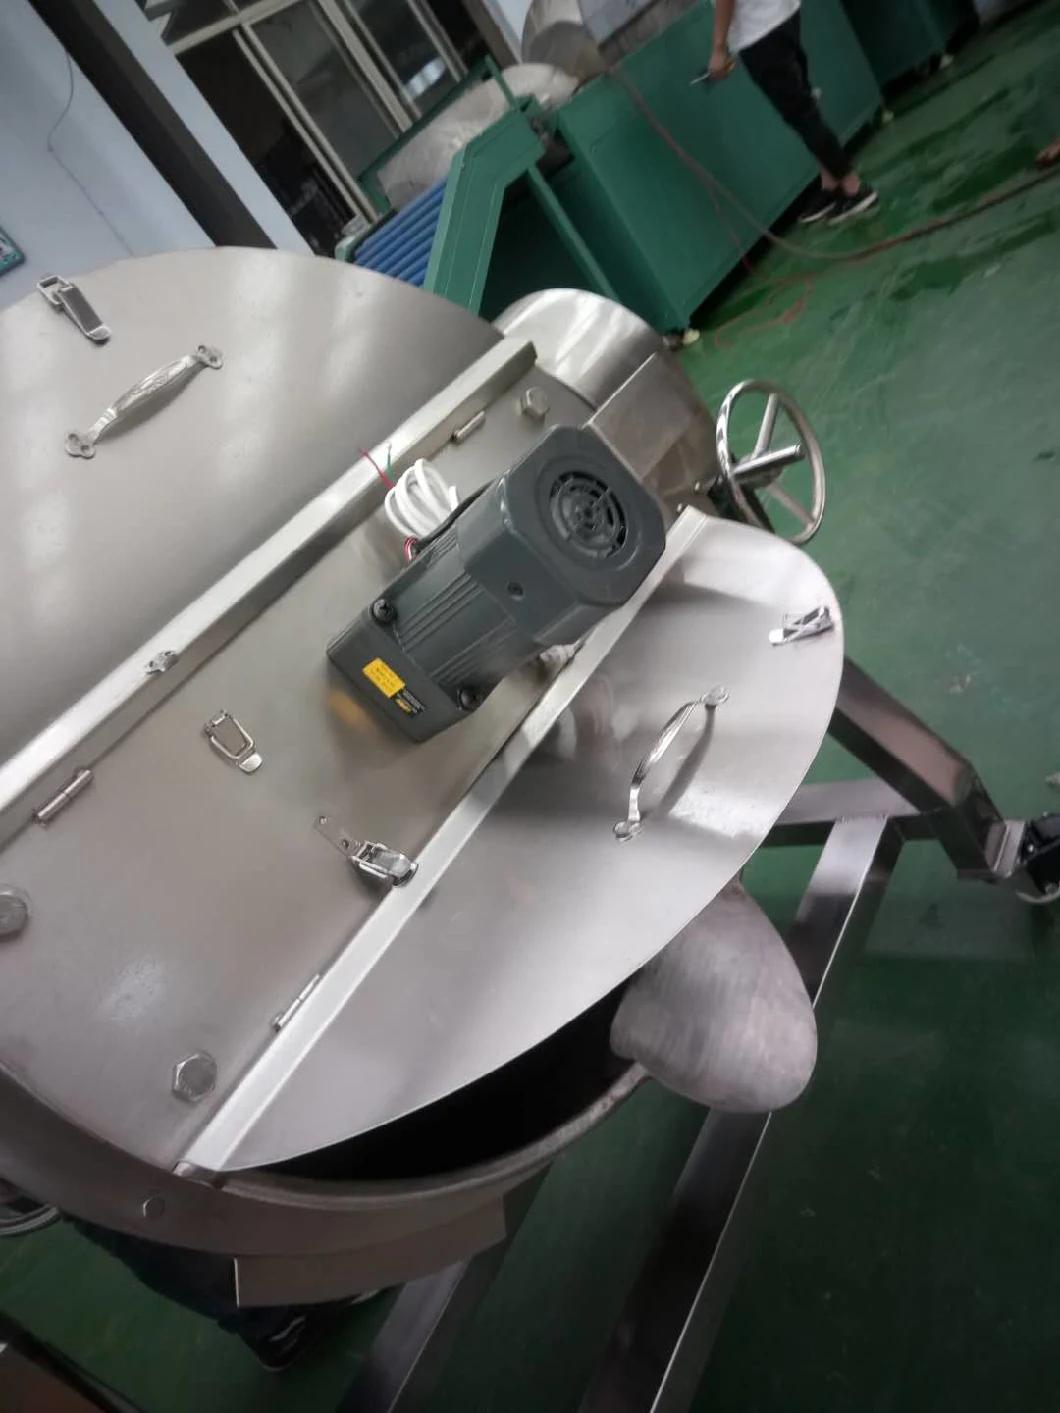 Steam Jacketed Kettle Tilting Jacketed Kettle